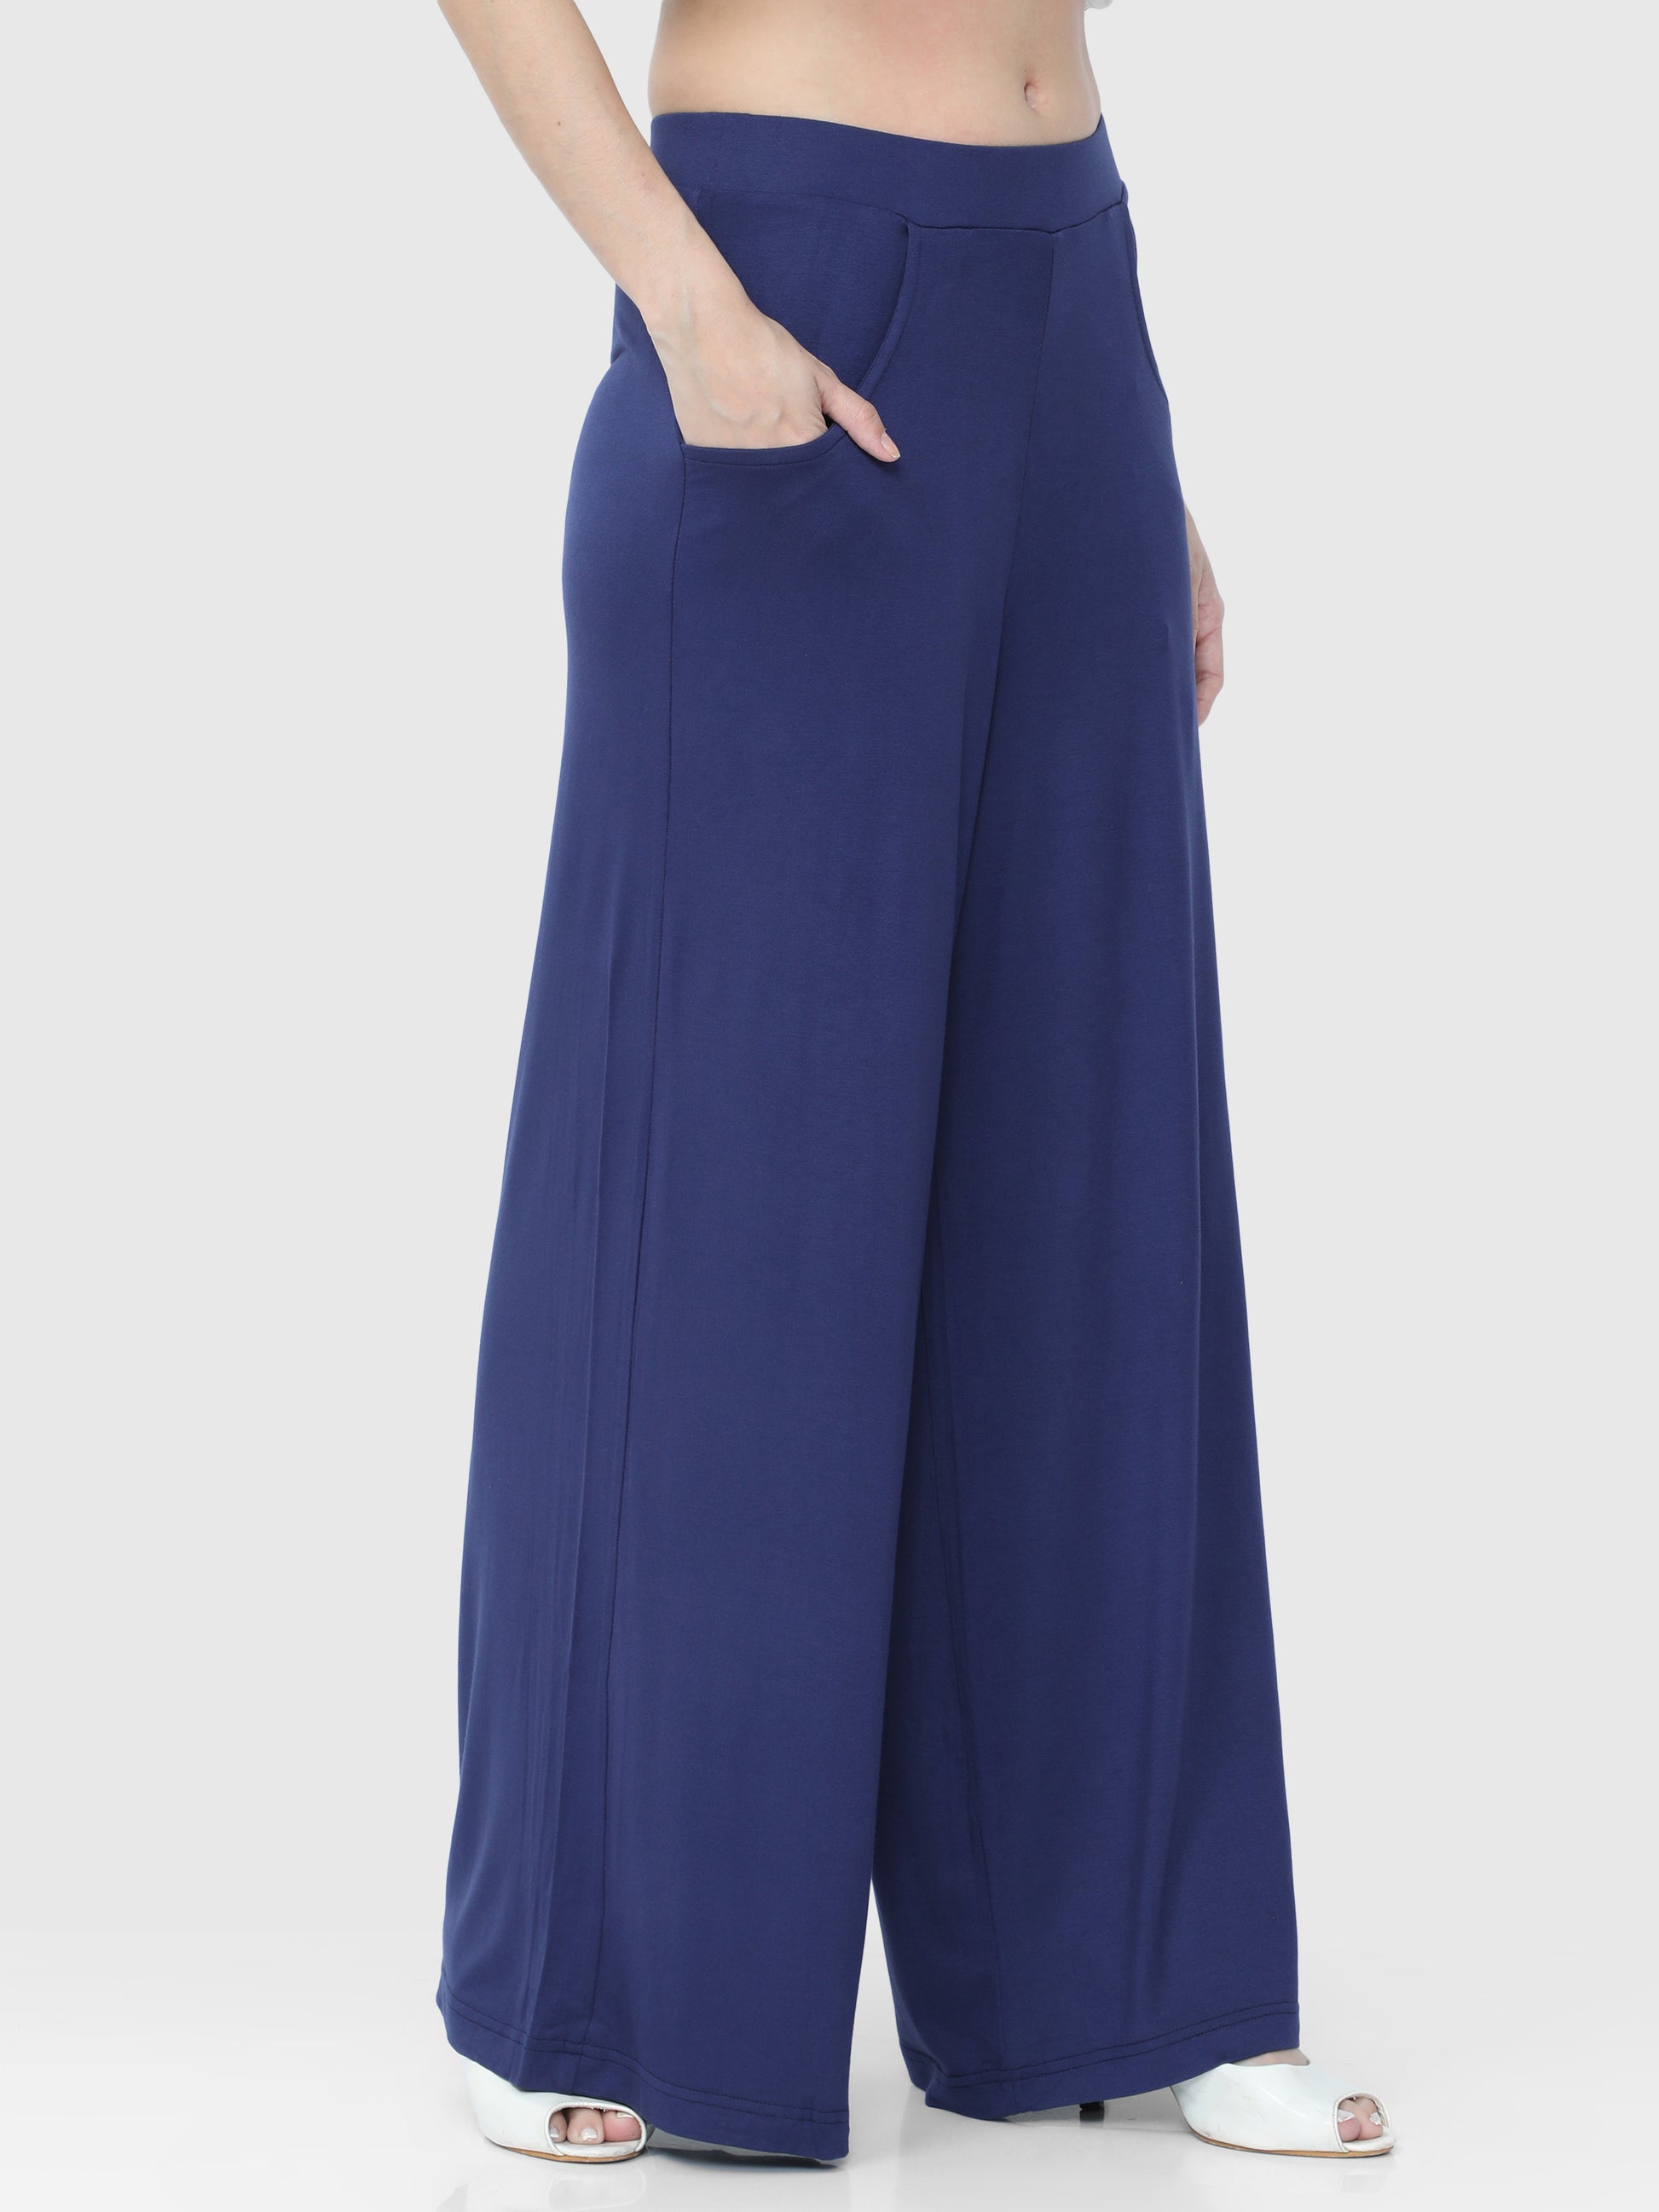 Royal Blue Solid Palazzo ANKLE-111